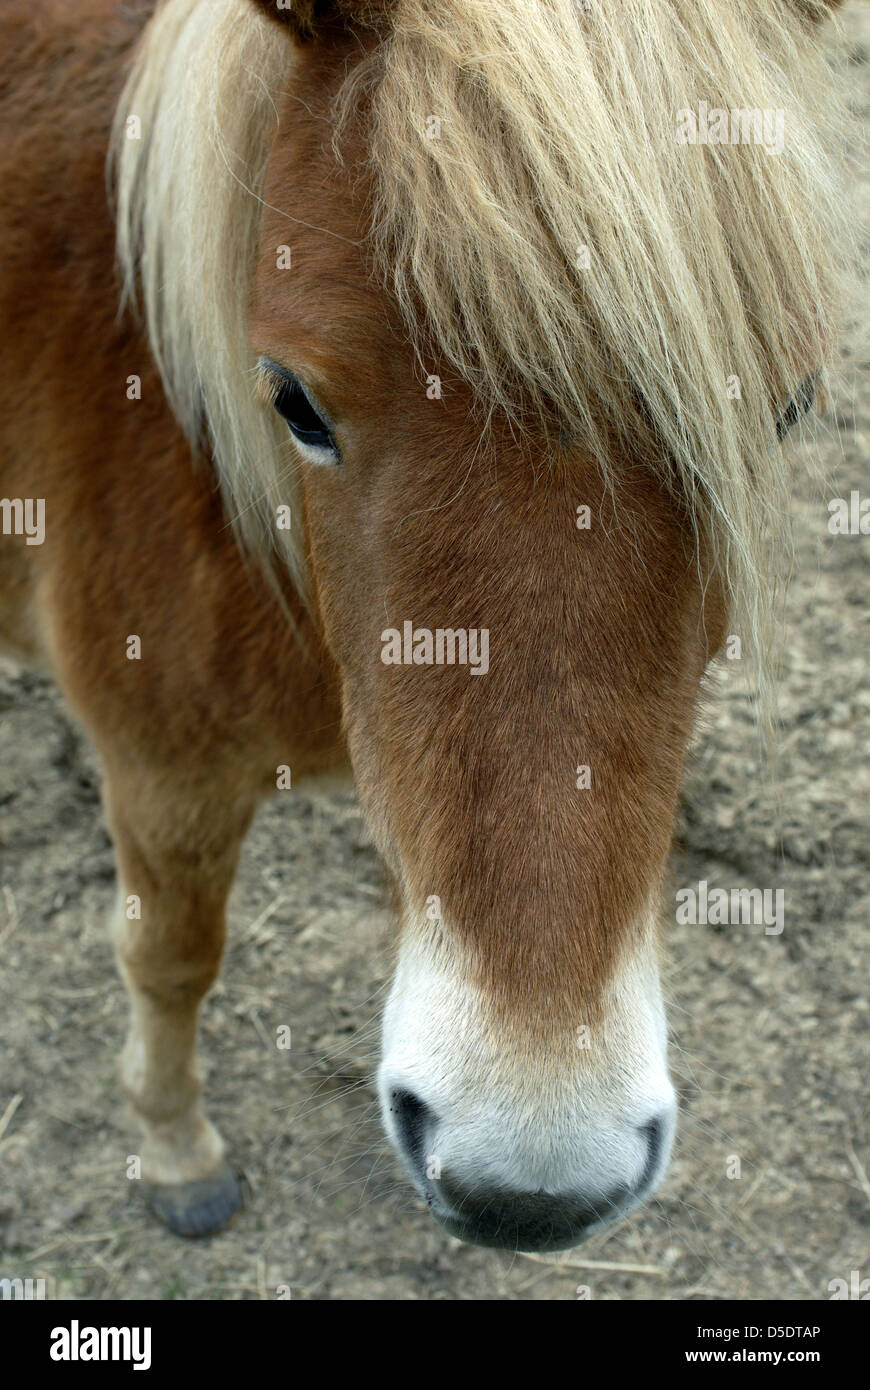 Horses head in an impertinent close-up Stock Photo